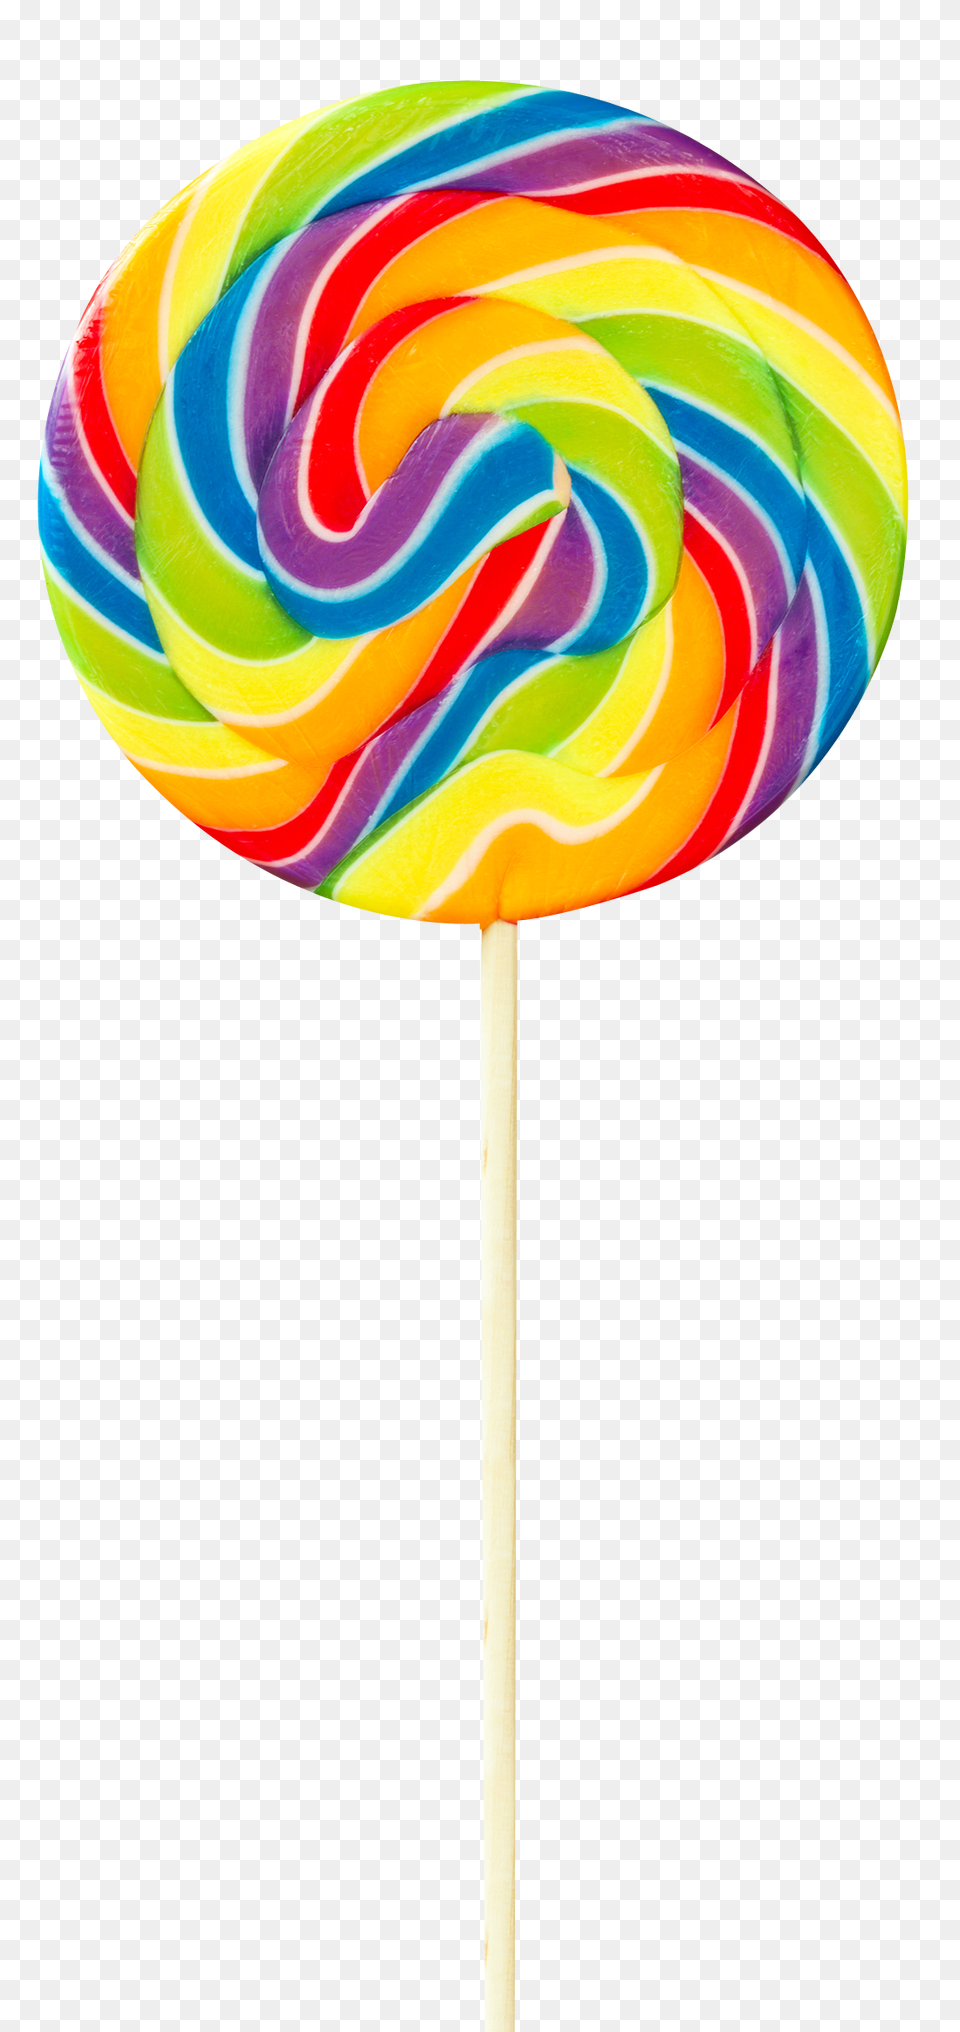 Pngpix Com Swirl Lollipop Transparent Image, Candy, Food, Sweets, Balloon Free Png Download